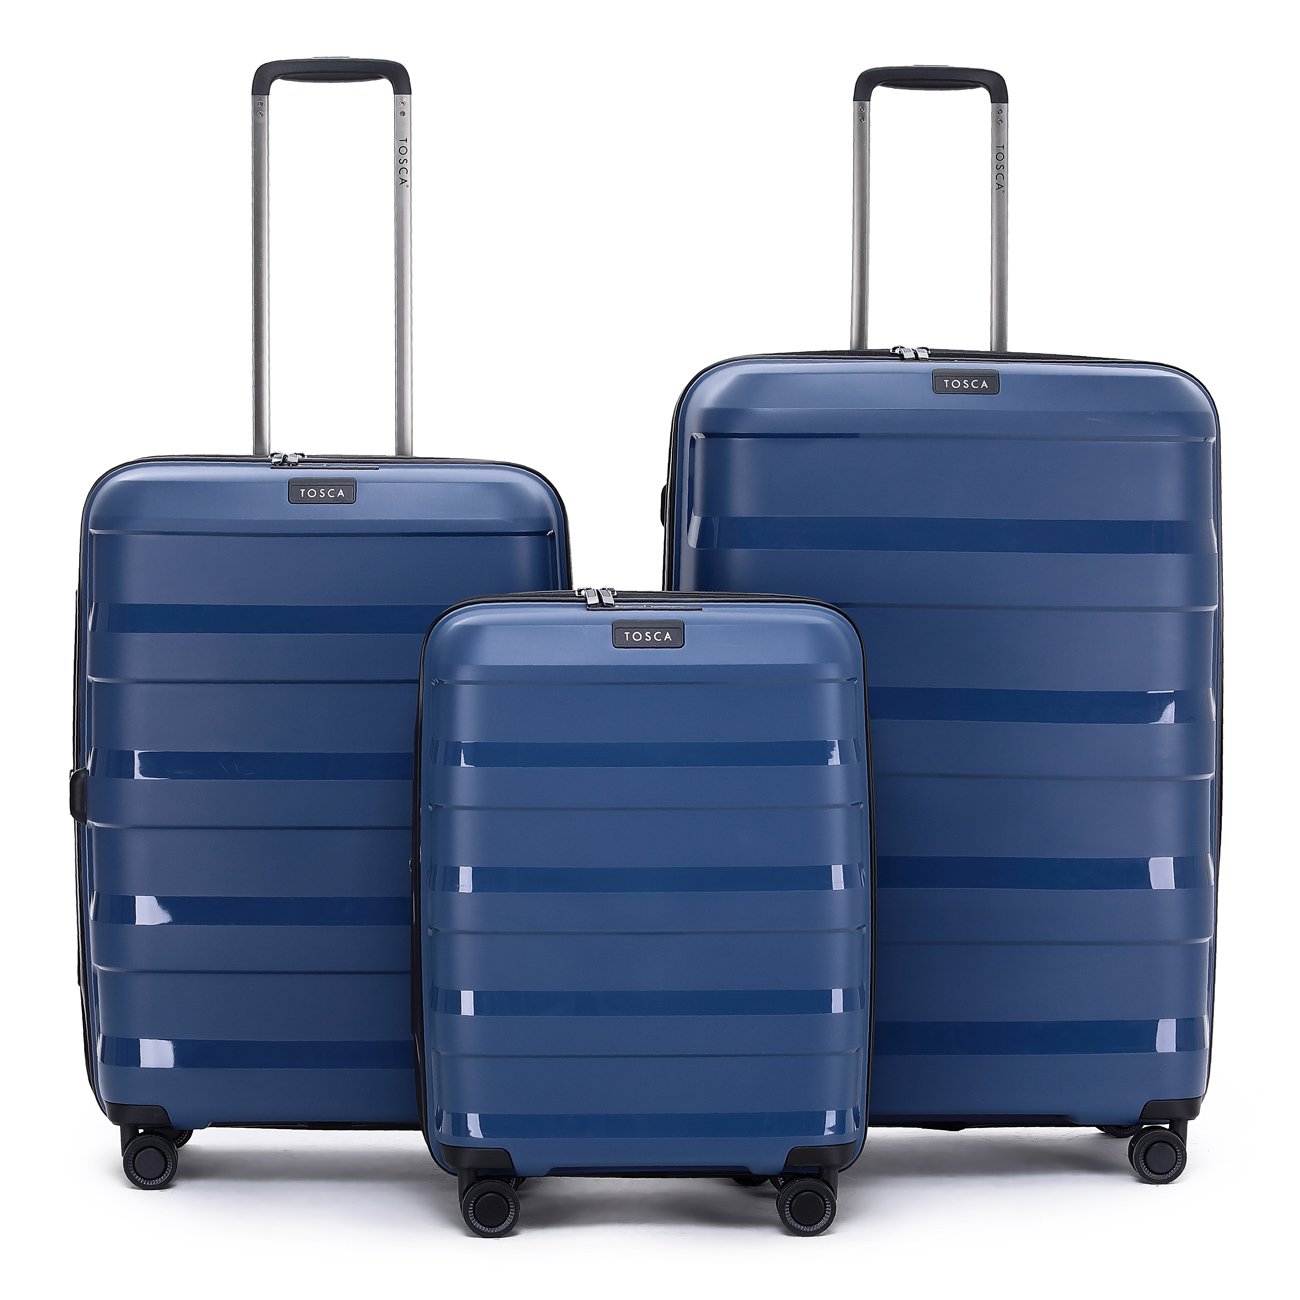 Comet luggage range - Navy - the-marketplace.co.nz